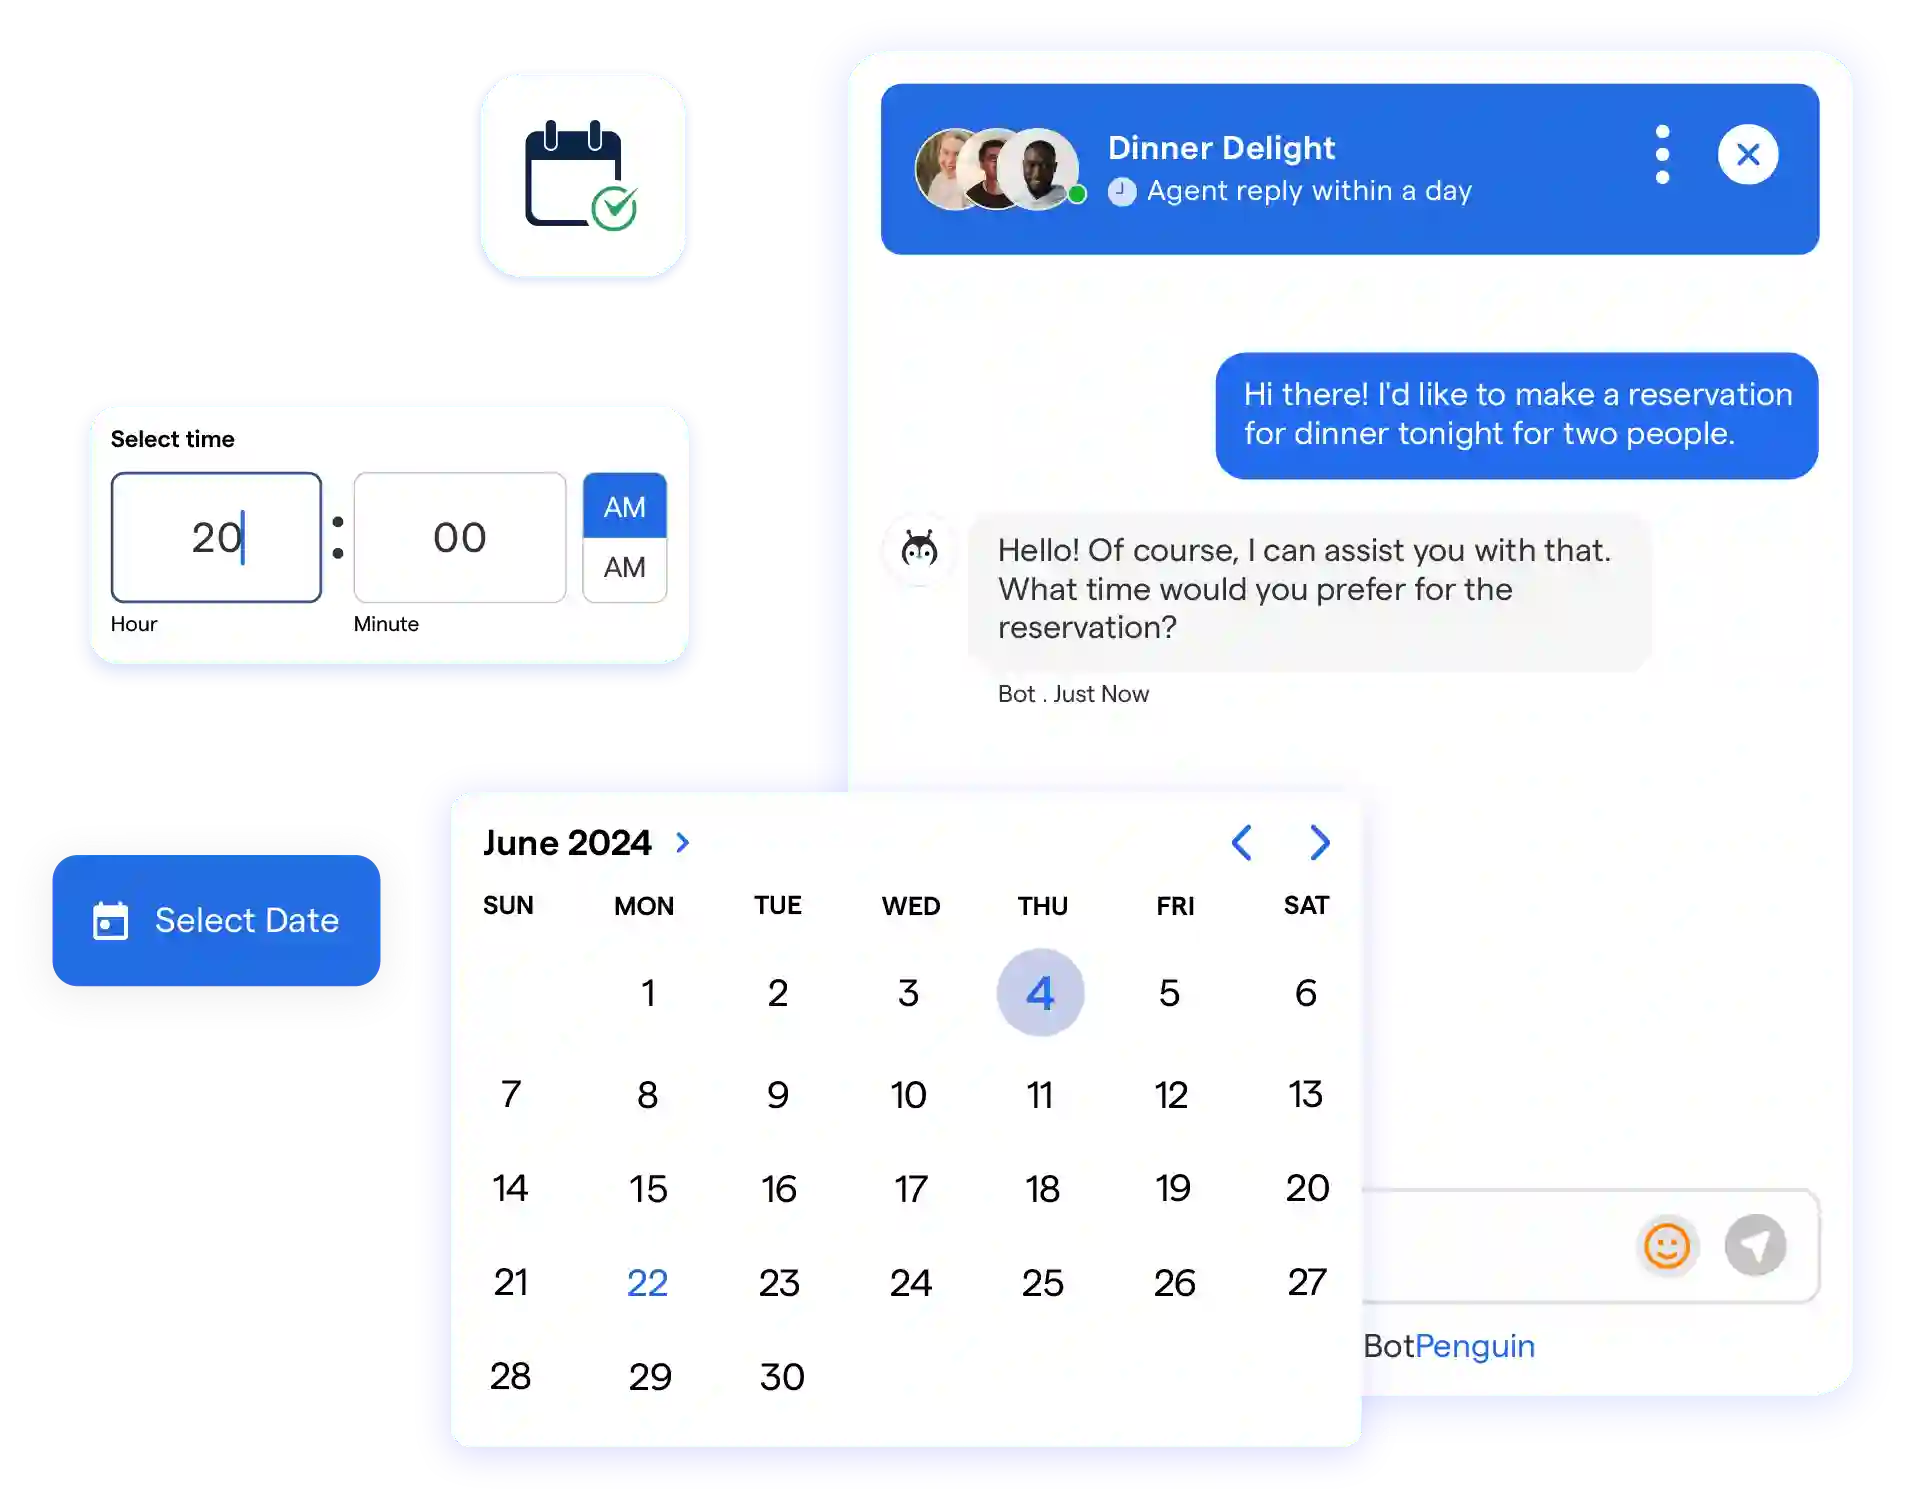 Examples of SMS notifications, Inquiries, and Appointment Scheduling Via Chatbots